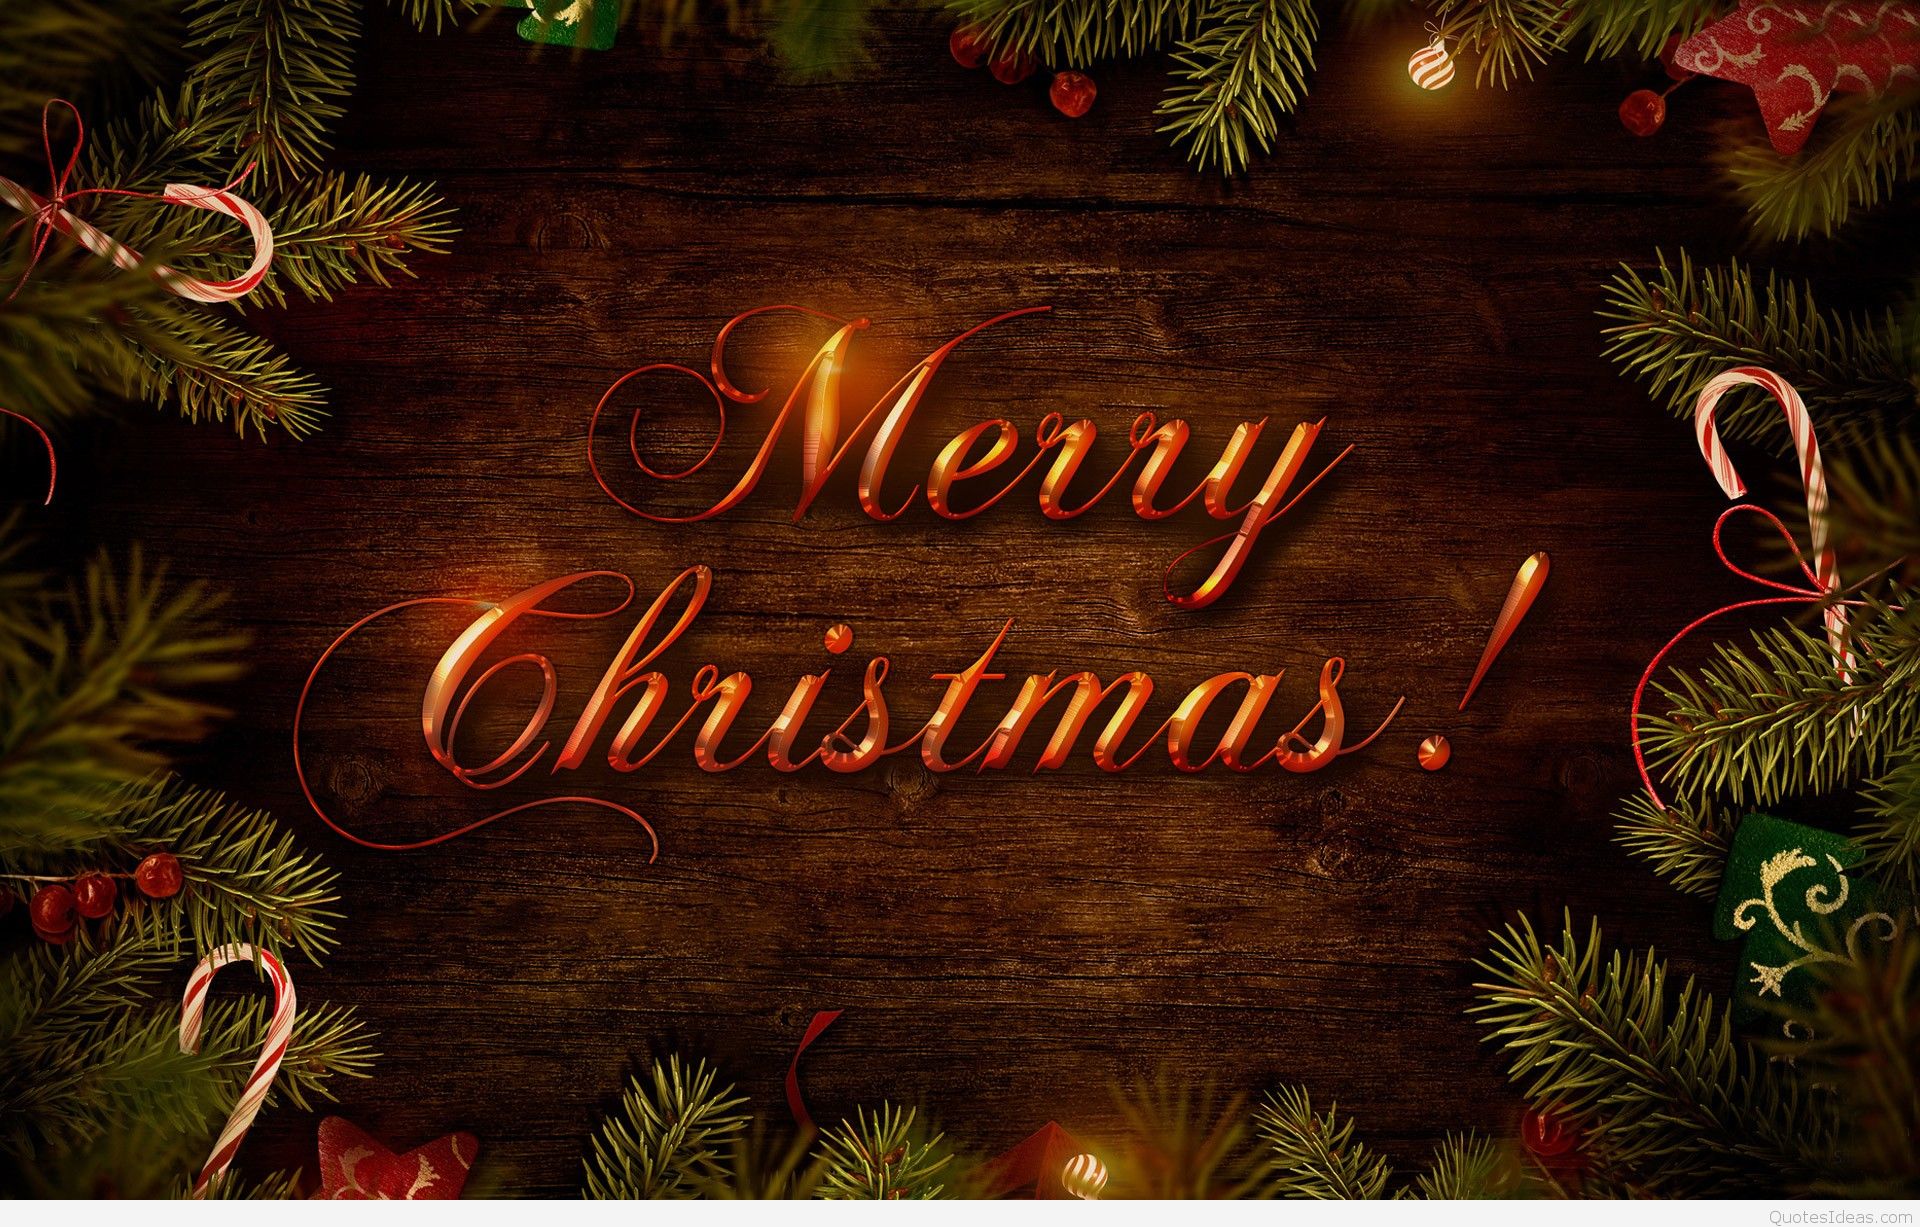 Merry Christmas Wishes Images Free